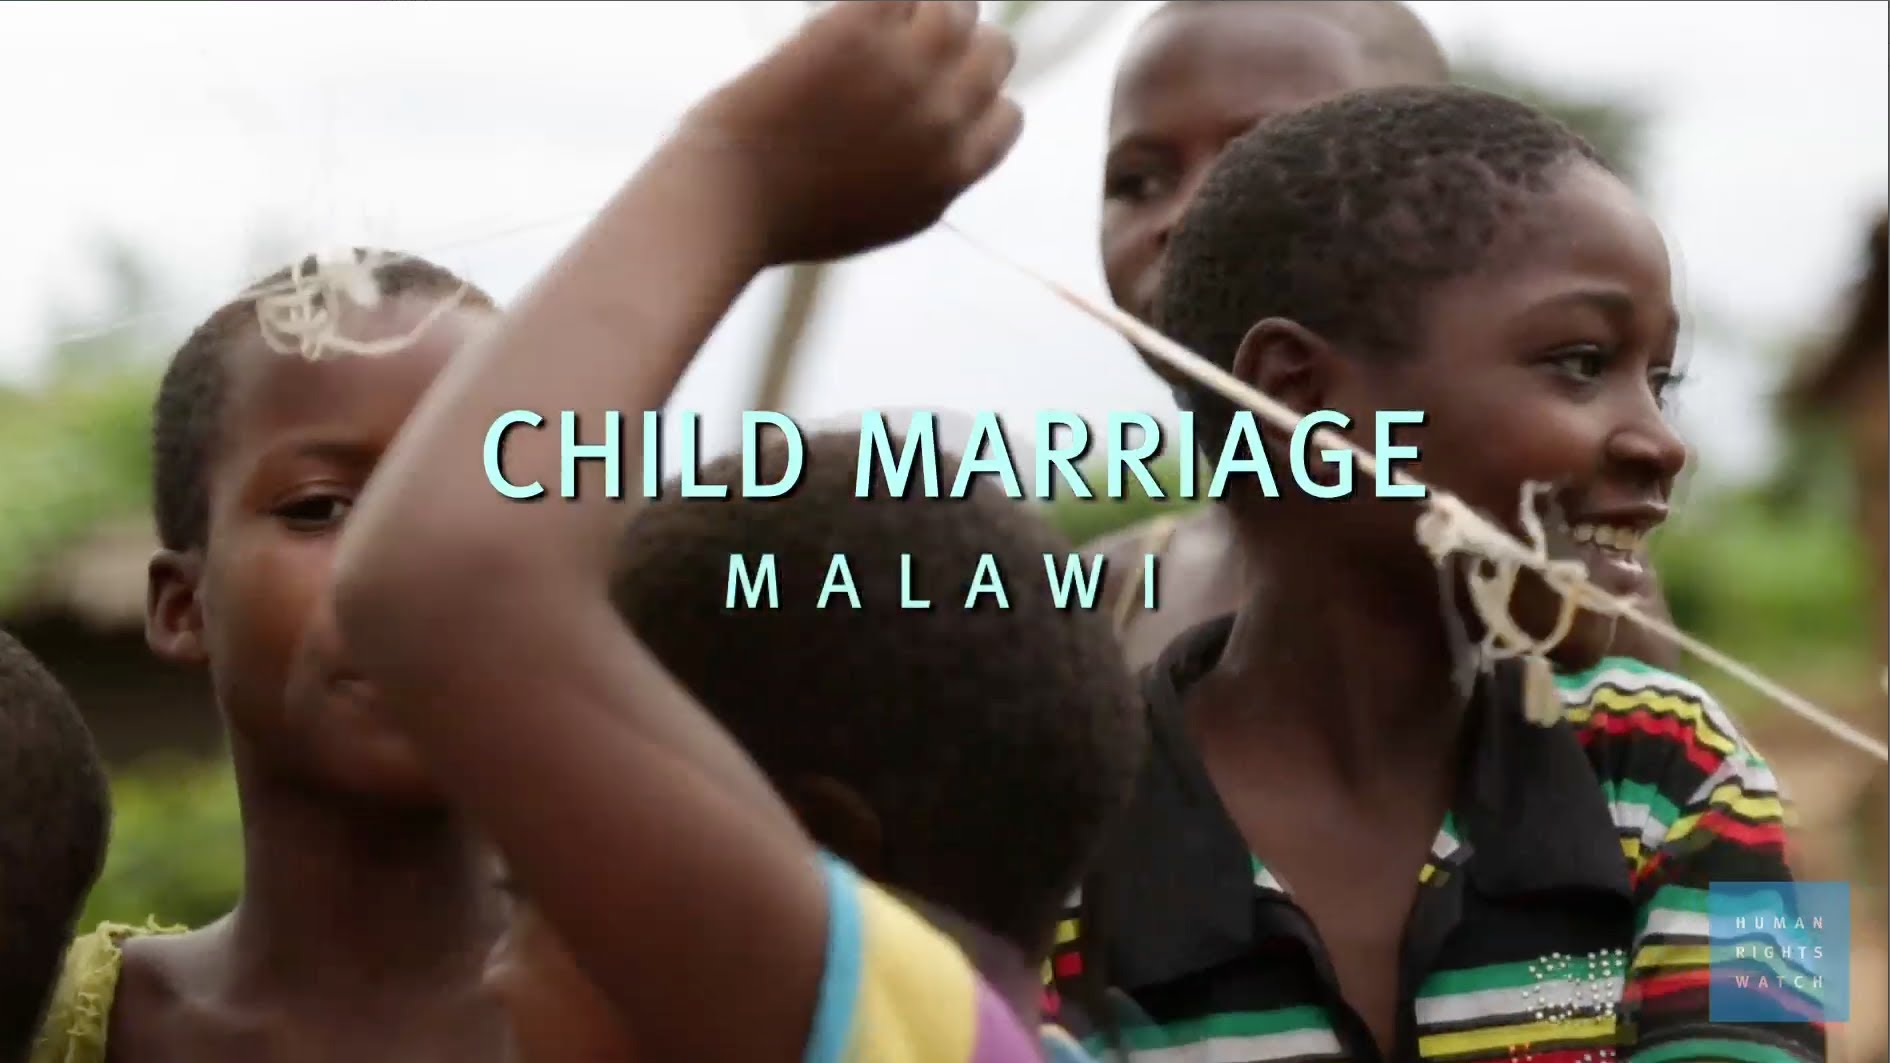 End widespread child marriage in Malawi, urges Human Rights Watch in new report